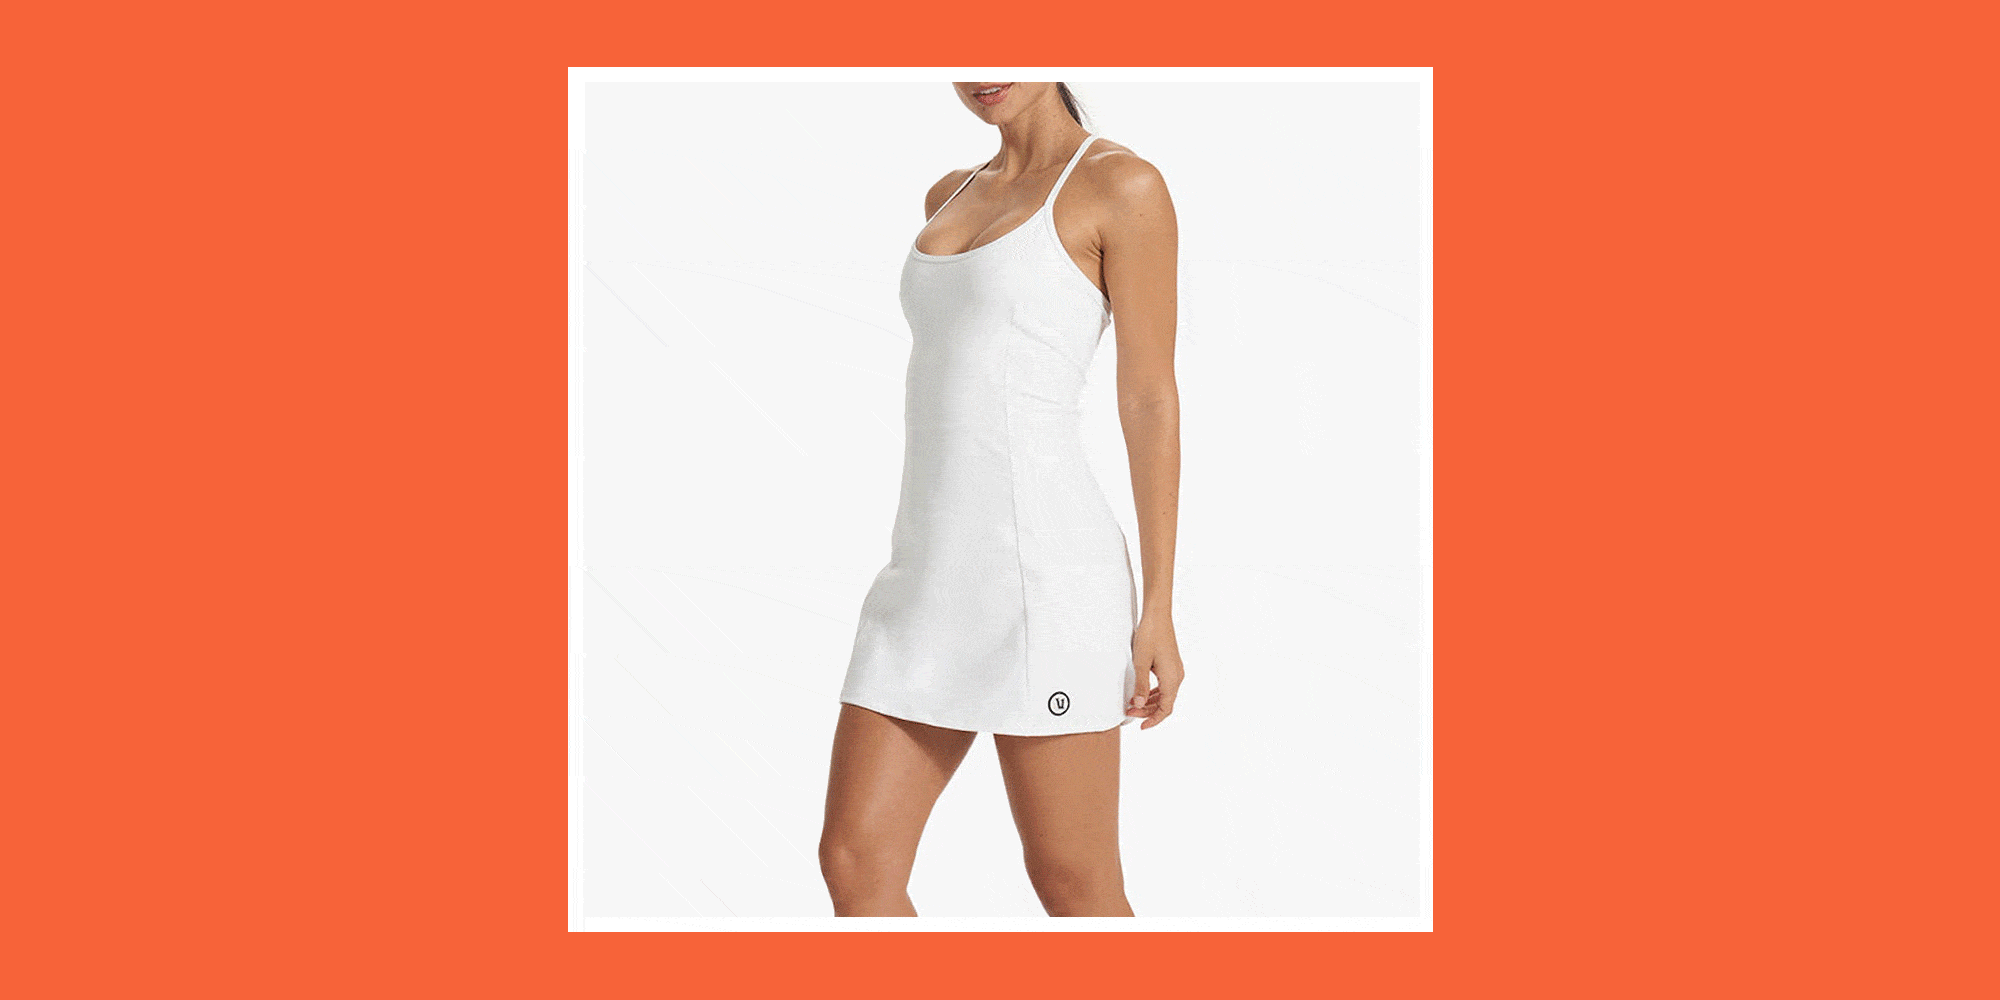 Women Workout Tennis Dress With Built In Bra Shorts Shoulder Straps And  Pockets